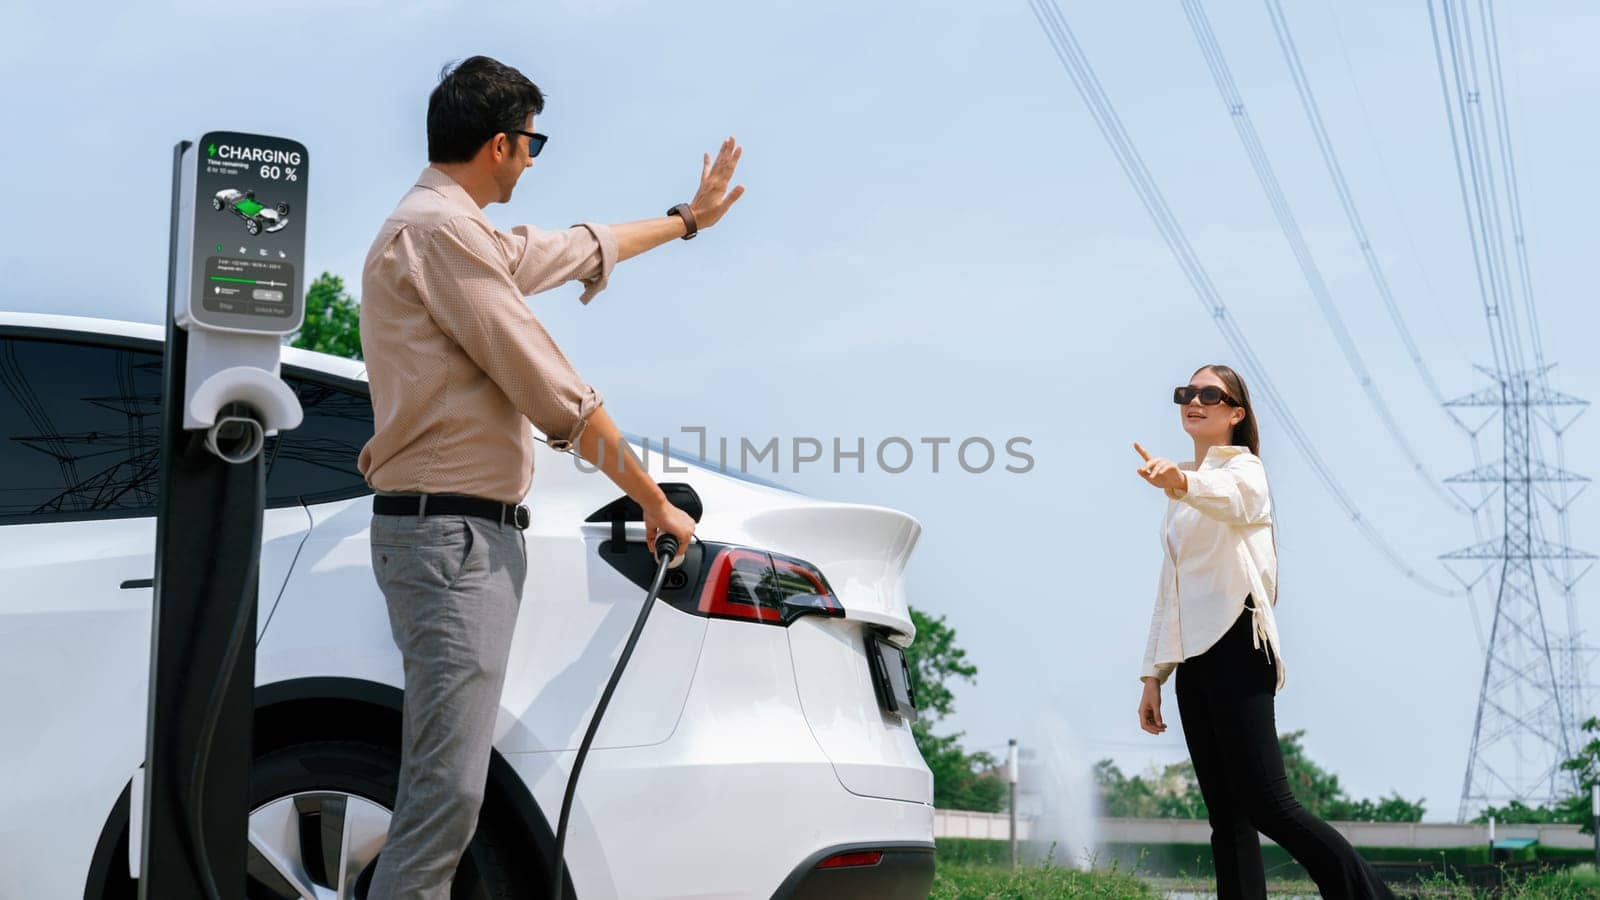 Young couple recharge EV car battery at charging station connected to power grid tower electrical industrial facility as electrical industry for eco friendly vehicle utilization. Expedient